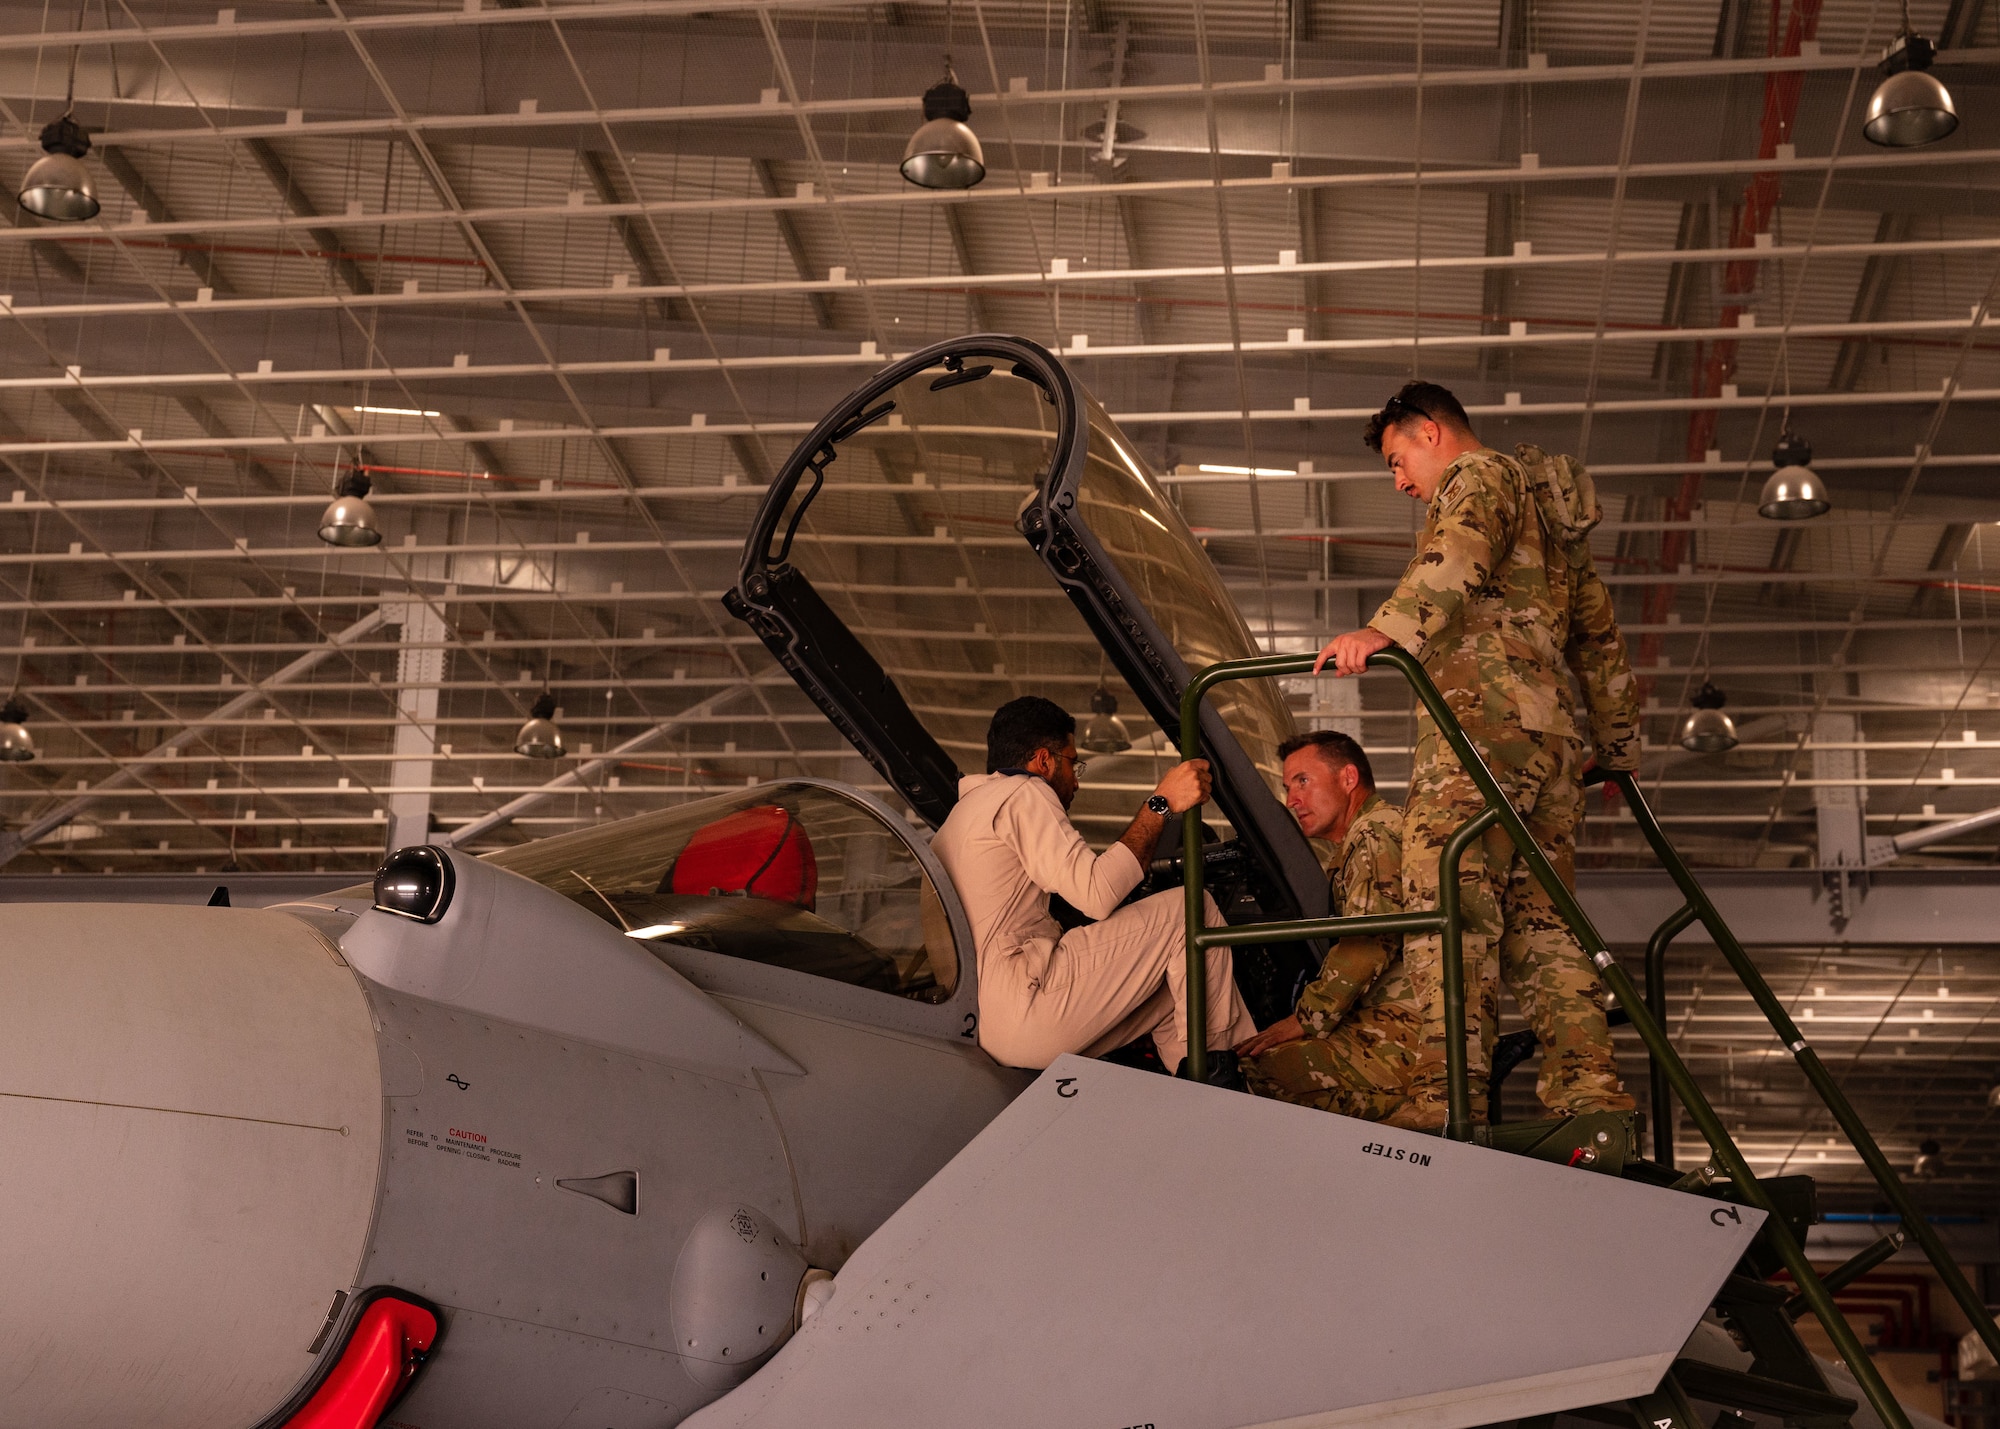 A Royal Air Force of Oman fire chief, left, briefs U.S. Air Force firefighters from the 379th Air Expeditionary Wing, on RAFO fire safety measures in a RAFO Eurofighter Typhoon aircraft at Thumrait Air Base, Oman, May 18, 2022. The RAFO fire chief showed the U.S. Airmen the fire safety measures that reside within the cockpit. (U.S. Air Force photo by Staff Sgt. Dana Tourtellotte)